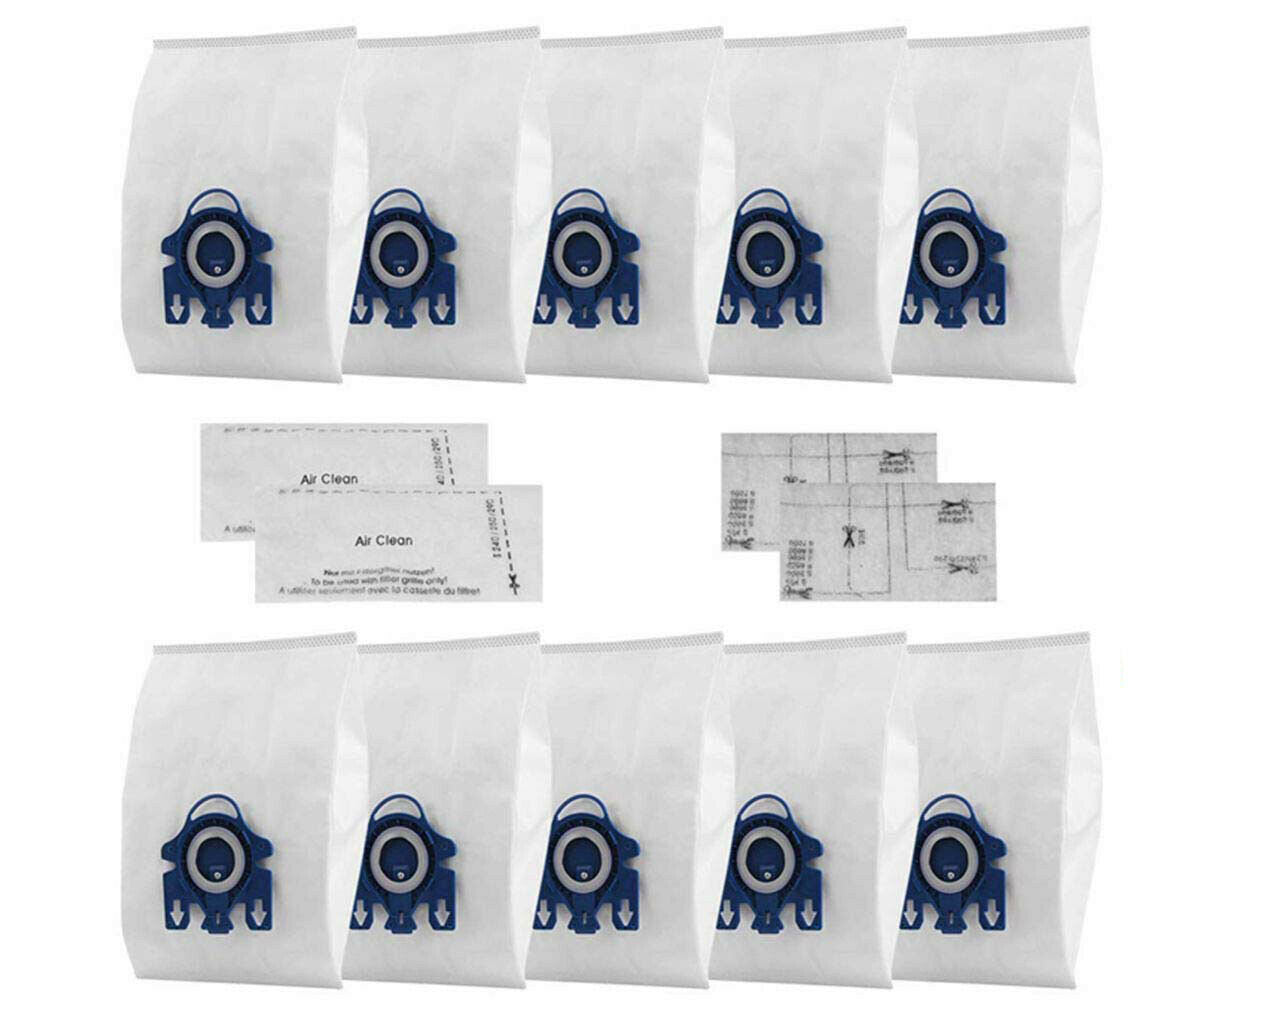 10pcs Vacuum Dustbags Bags + Filters For Miele G&N GN C3 C1 C2 S2000 S5000 S8000